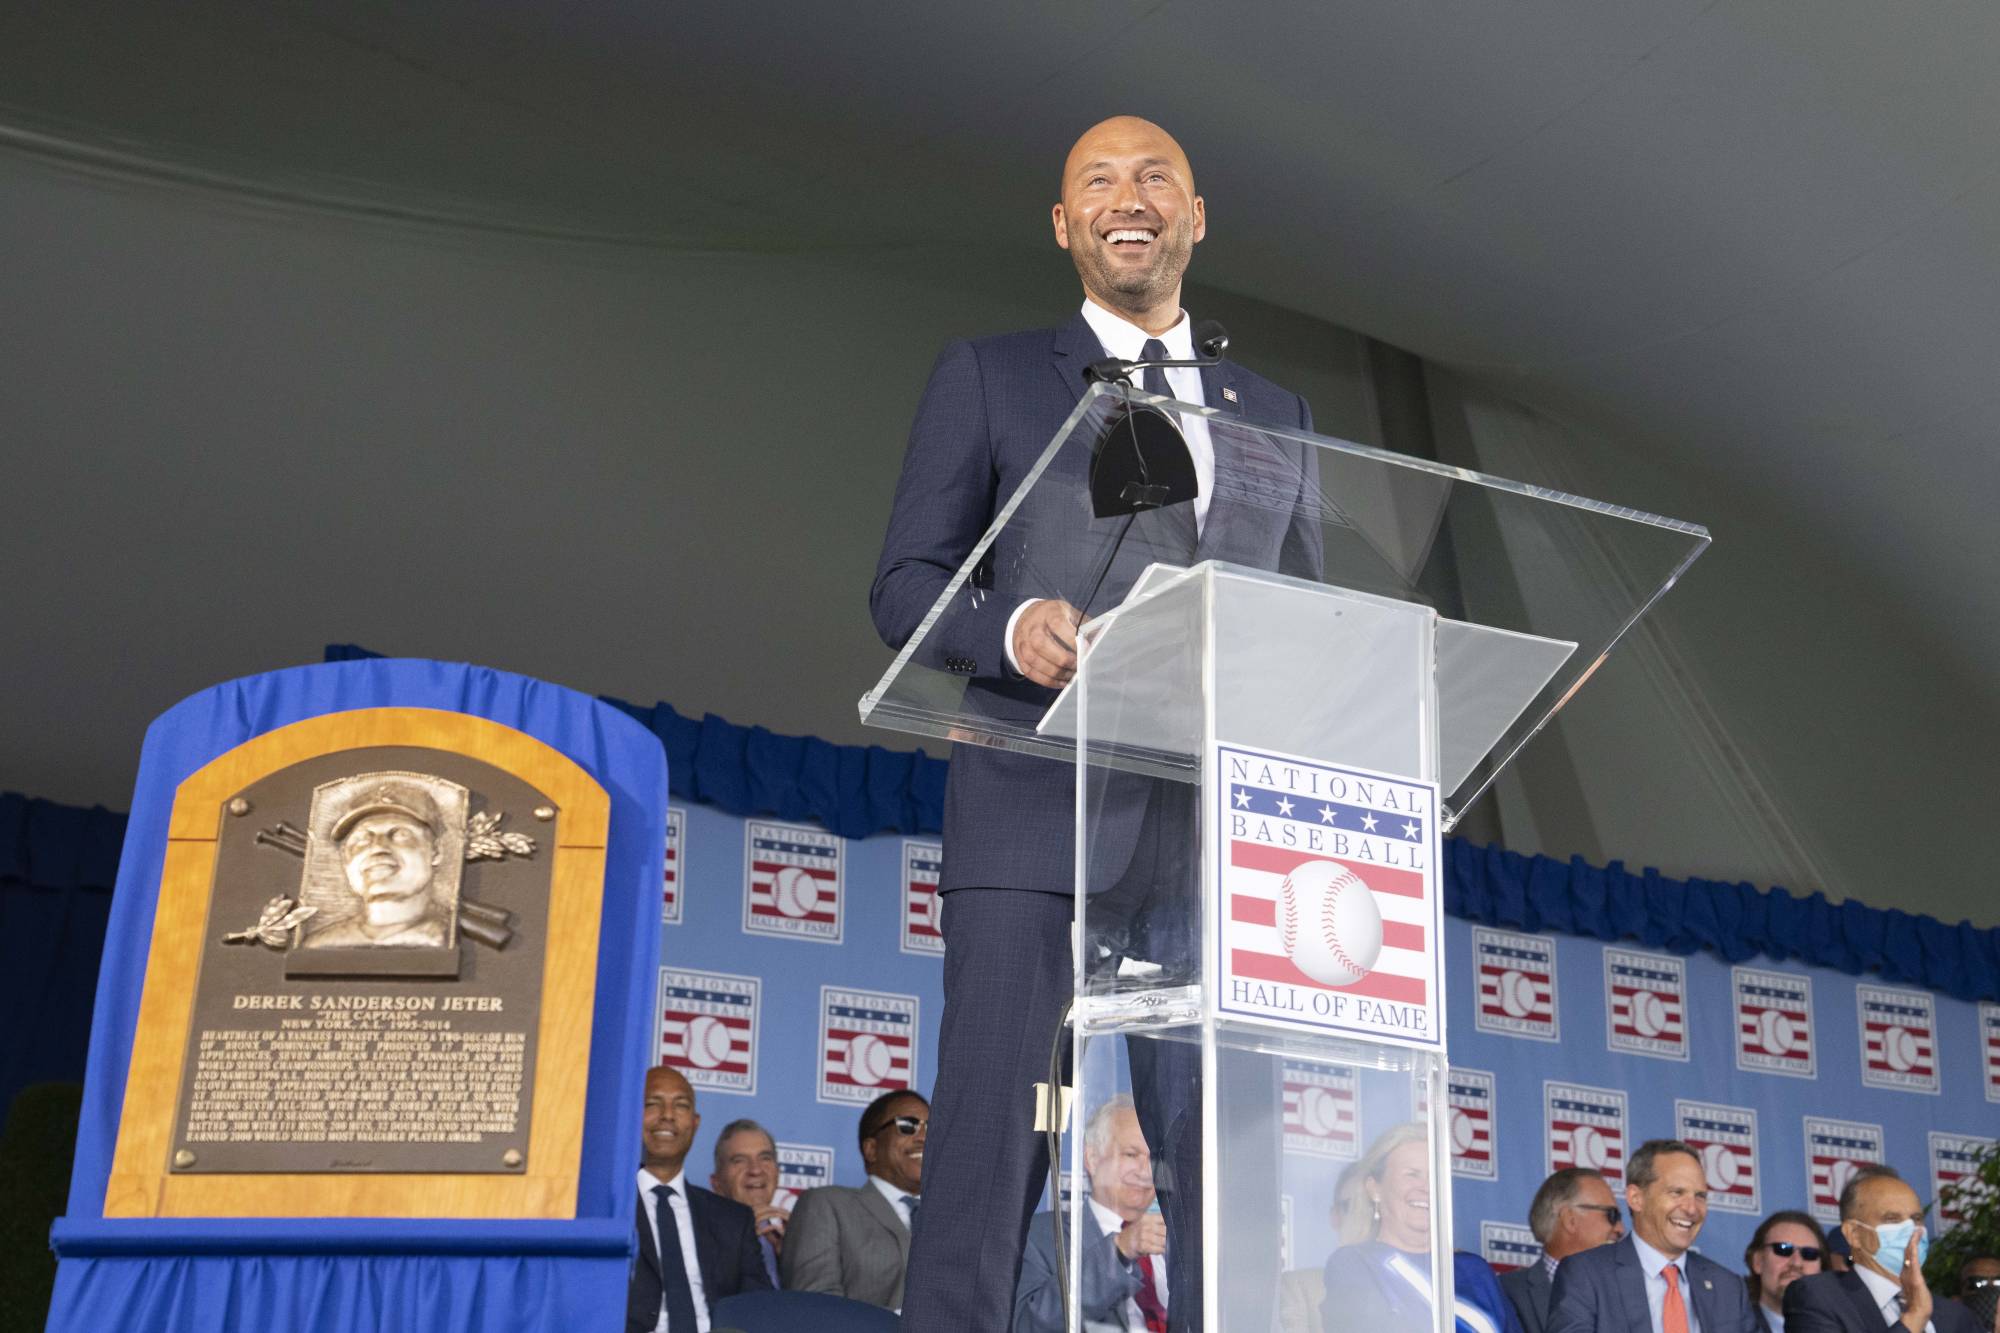 Yankees great Derek Jeter closes book on playing career with